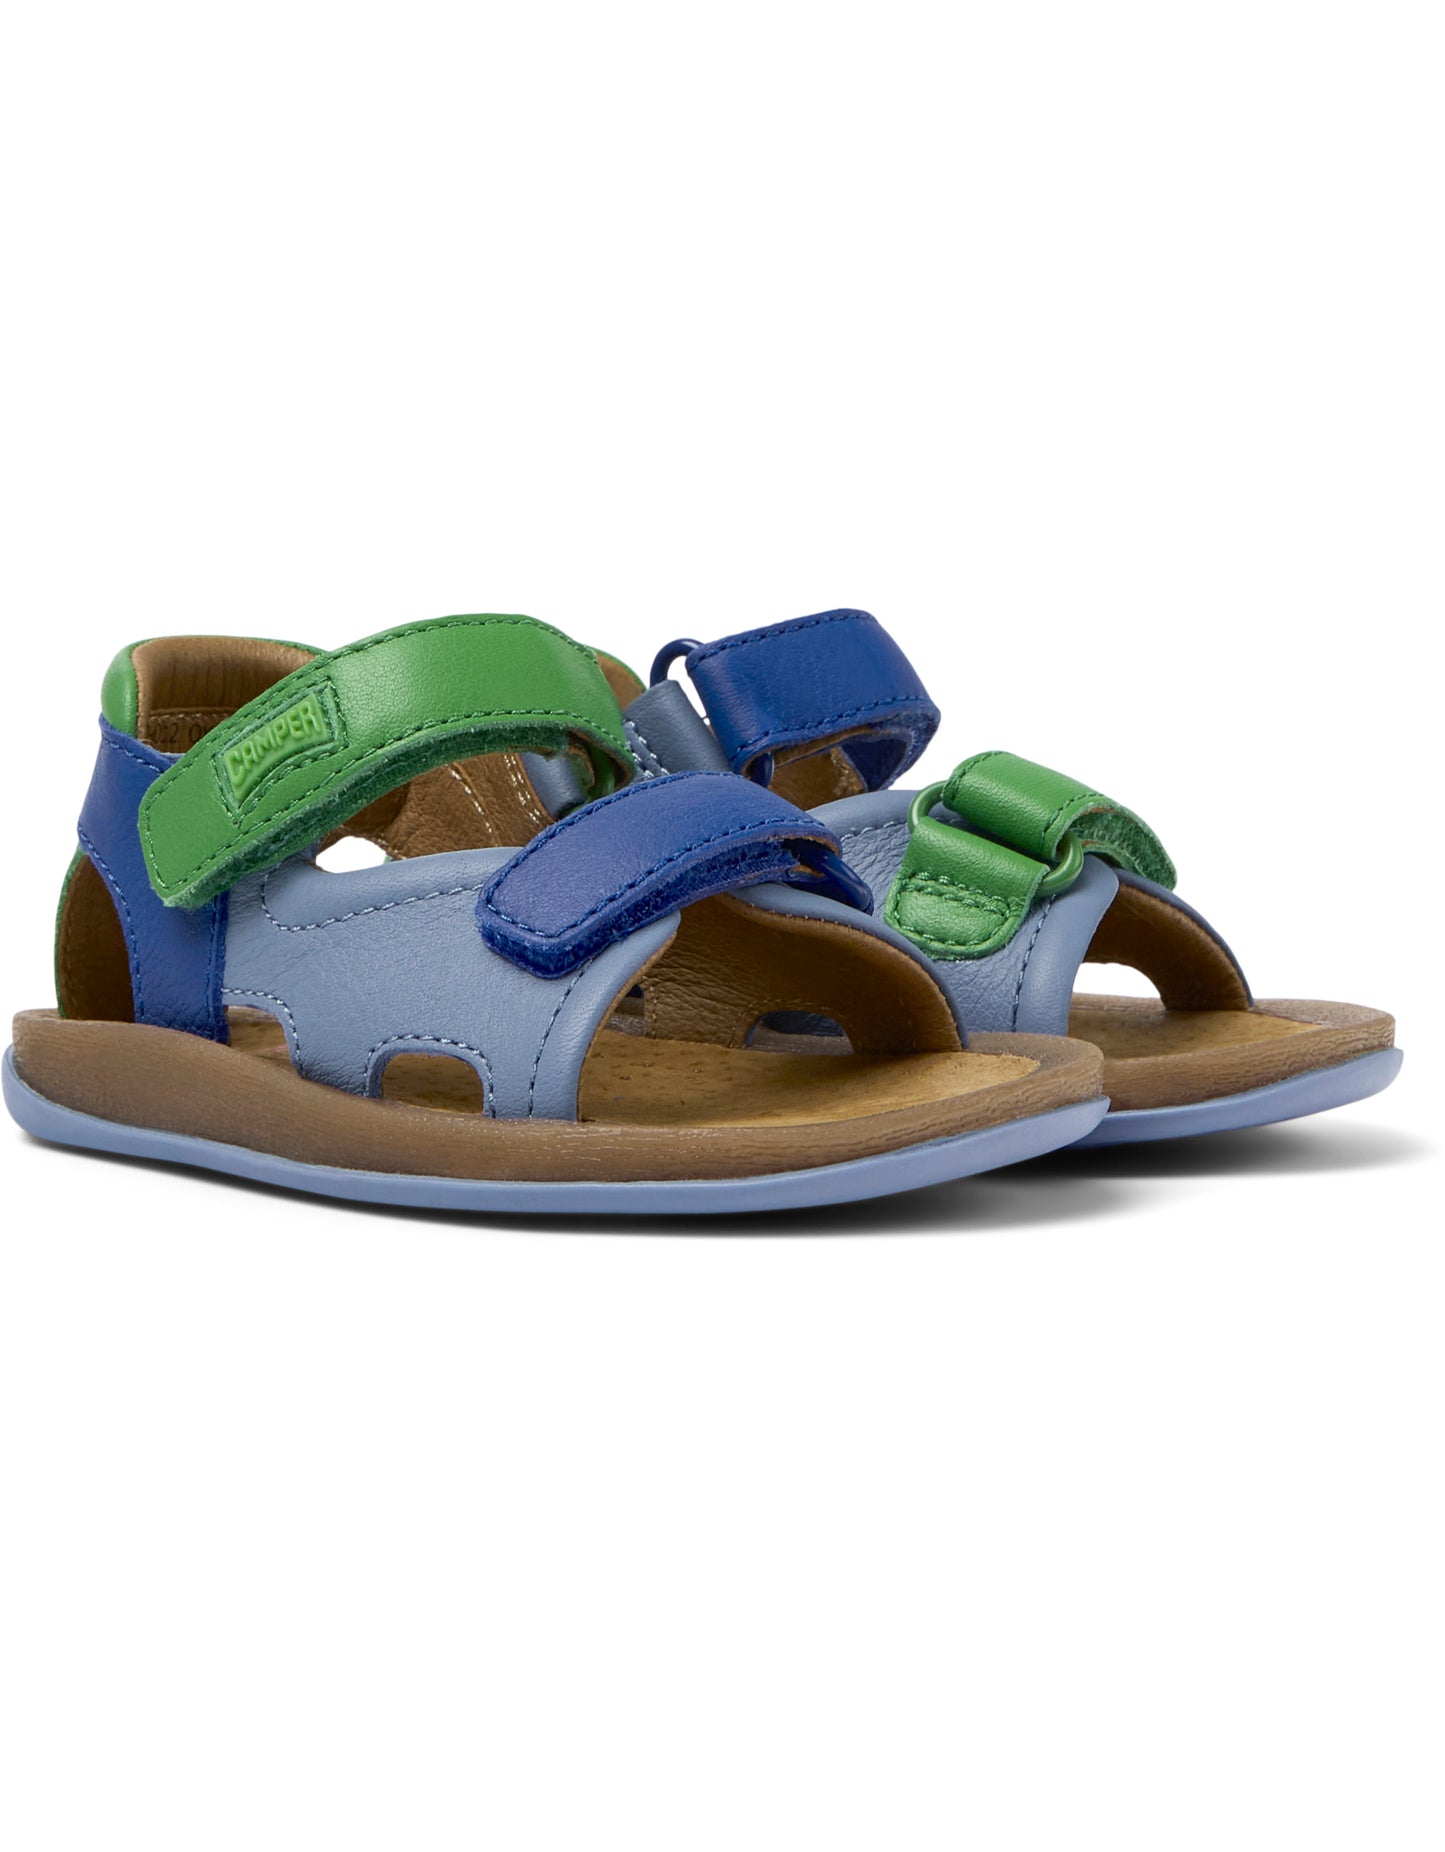 A unisex sandal by Camper, style Twins , open toe with aback, in blue and green with two velcro straps. Front angled view of a pair.